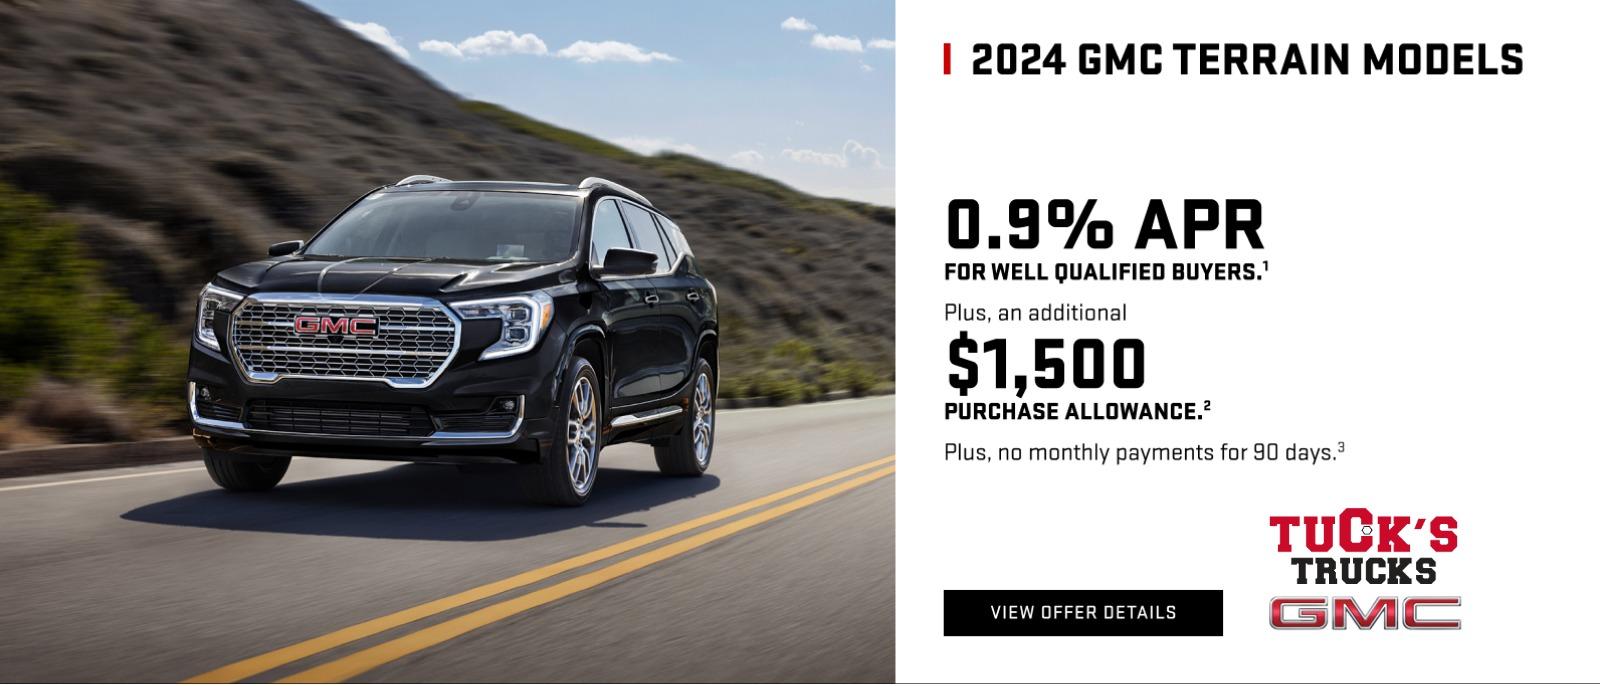 GMC Terrain May 2024 0.9% APR for well-qualified buyers. Plus, receive an additional $1,500 PURCHASE ALLOWANCE. Plus, no monthly payments for 90 days.